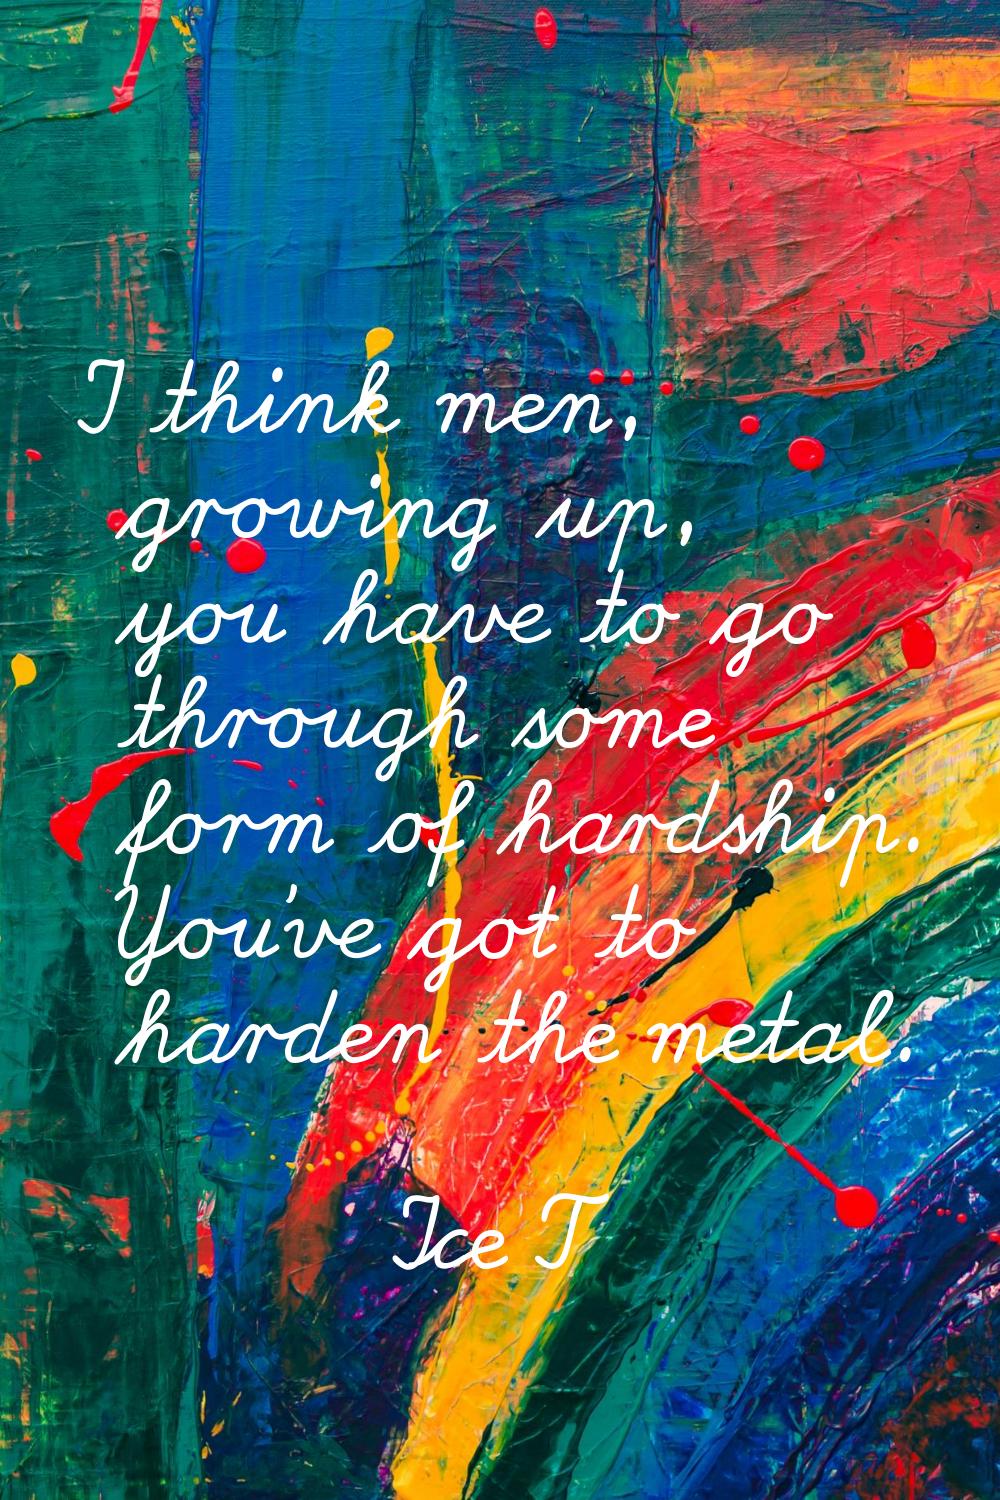 I think men, growing up, you have to go through some form of hardship. You've got to harden the met